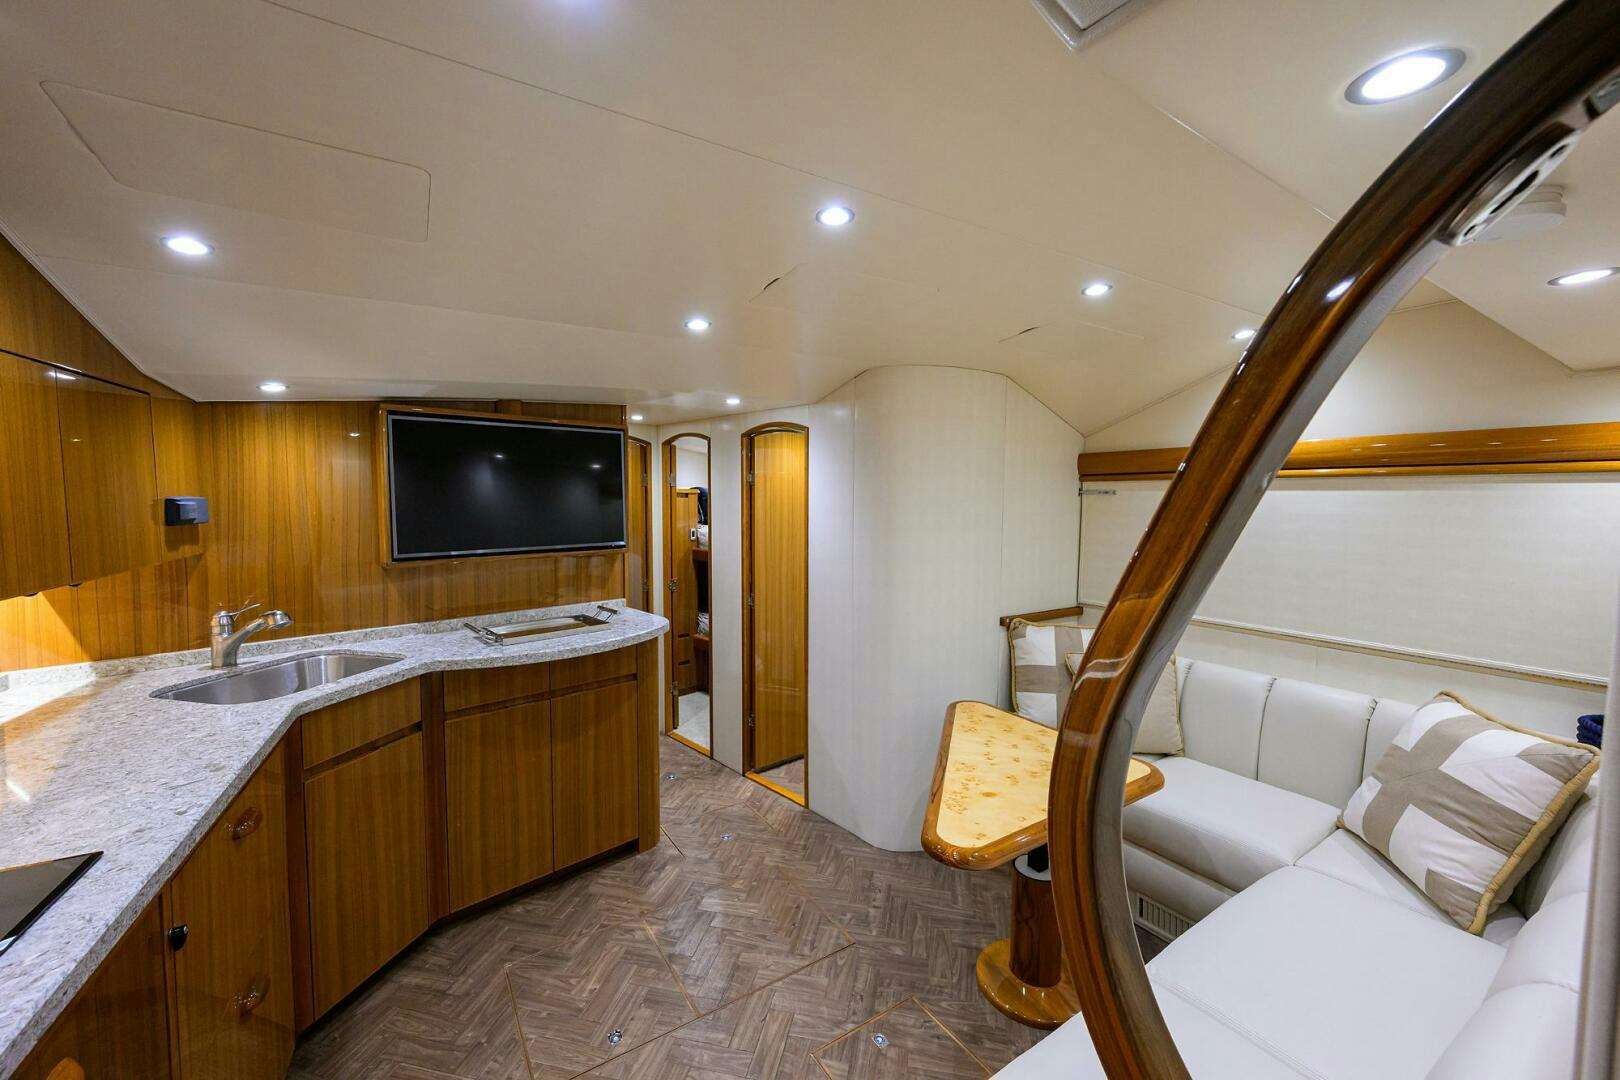 Private island
Yacht for Sale